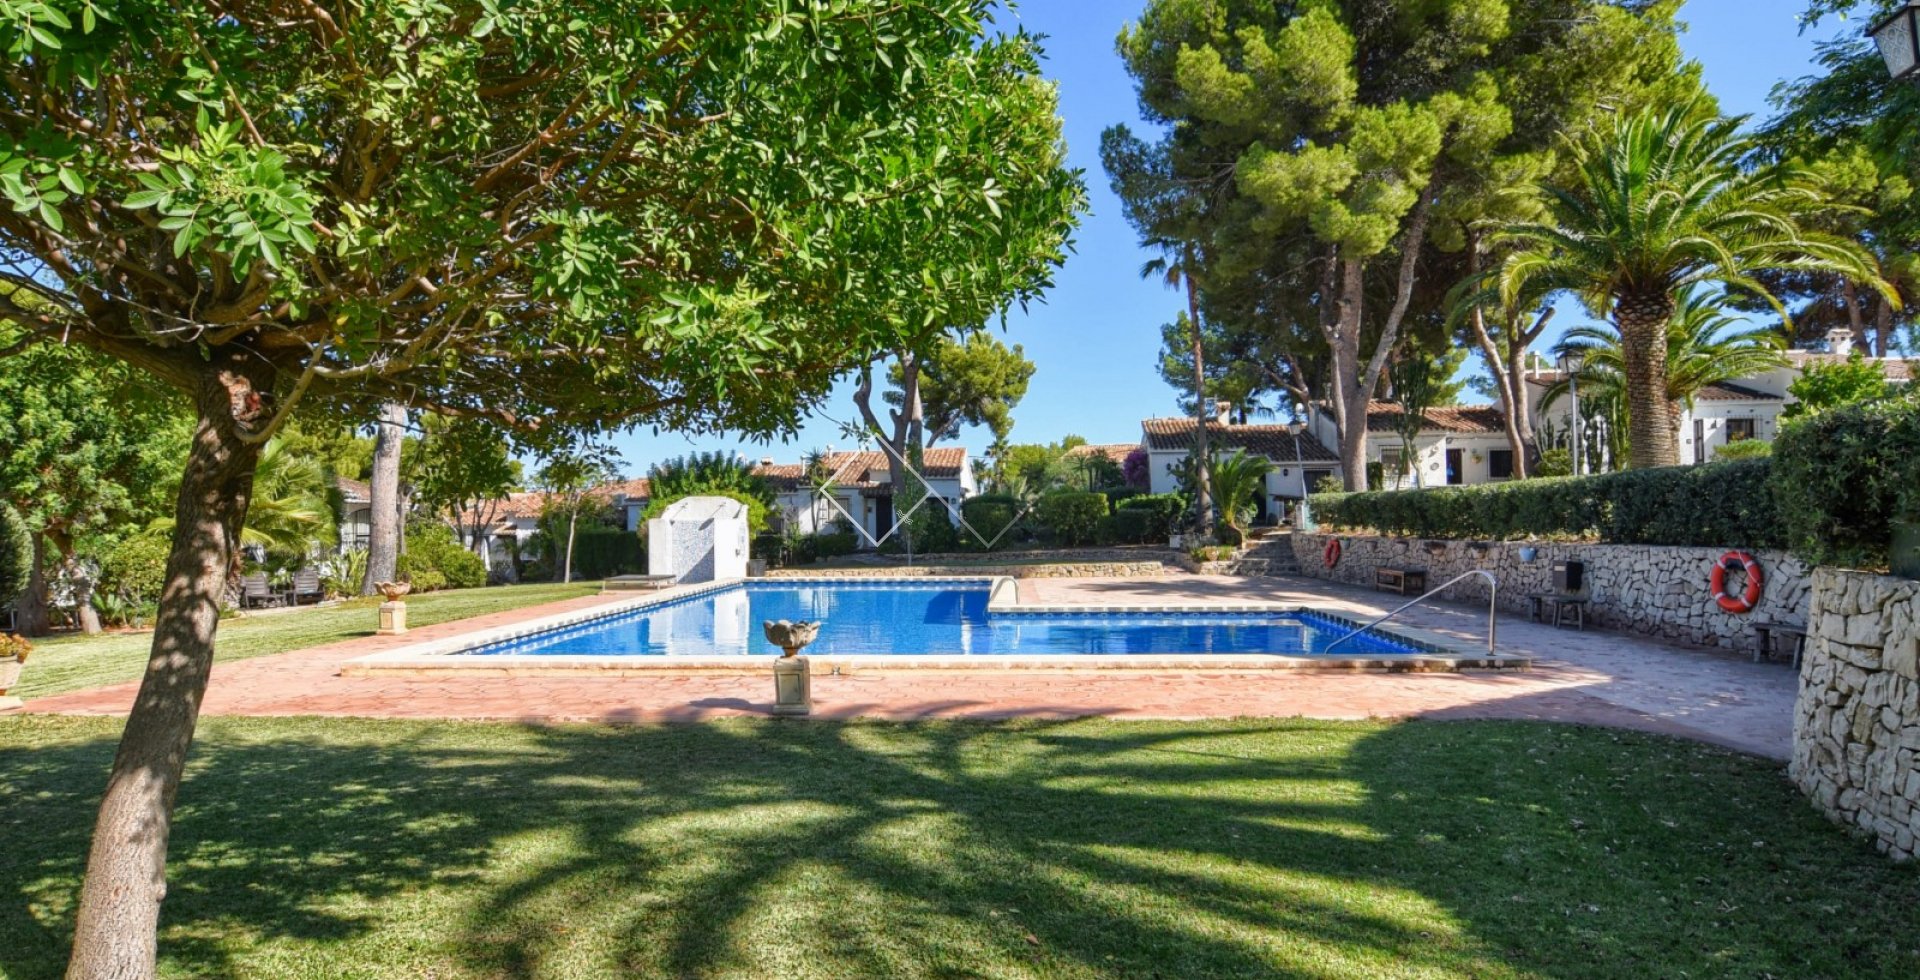 community pool - Attached house for sale in Fanadix, Moraira